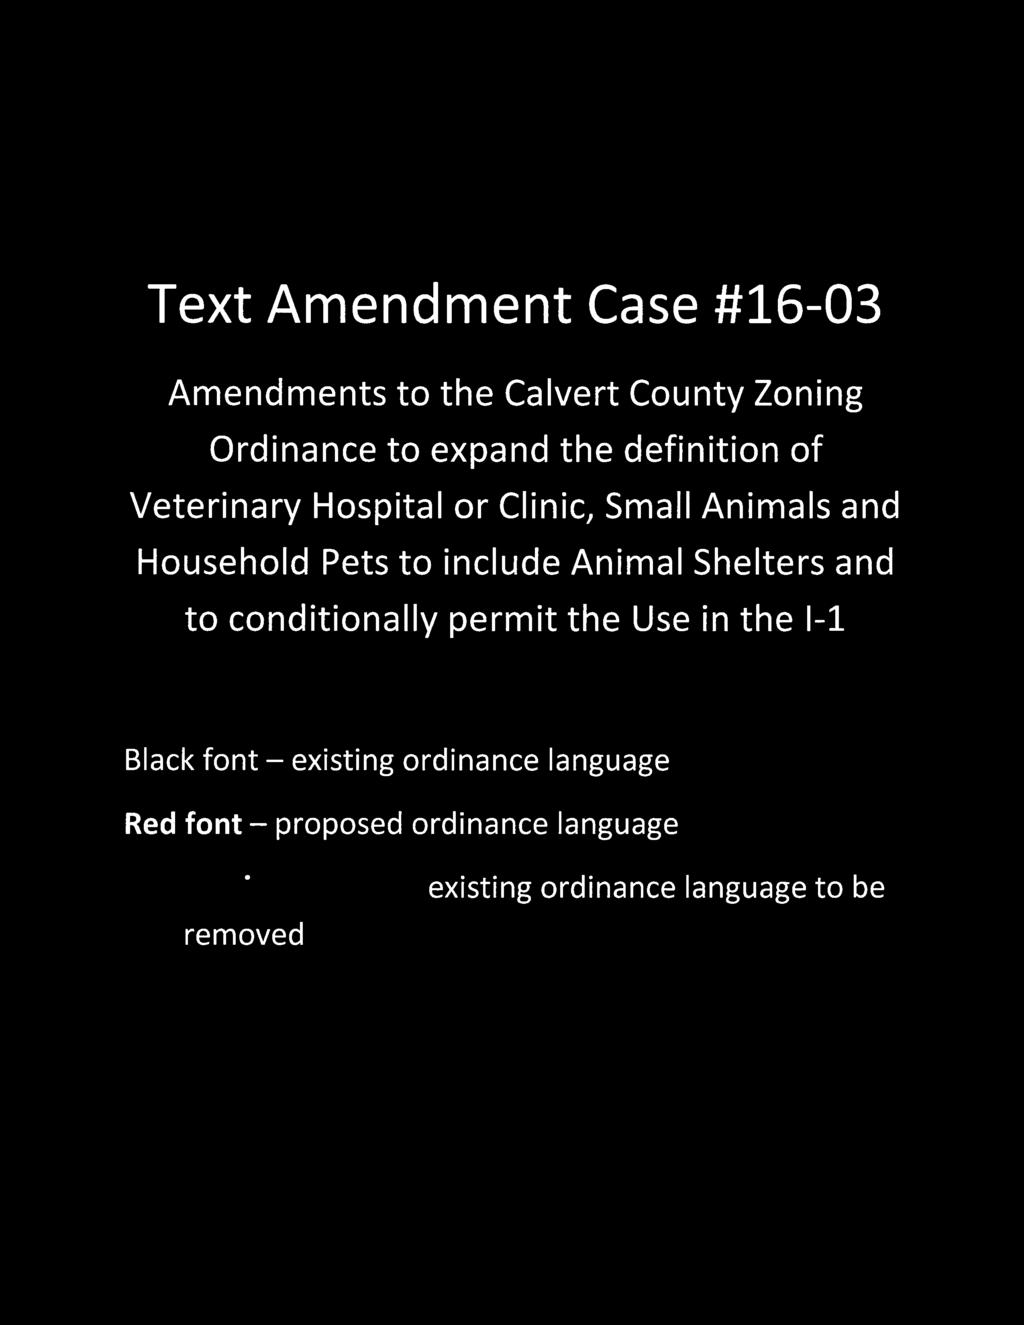 Text Amendment Case #16-03 Amendments to the Calvert County Zoning Ordinance to expand the definition of Veterinary Hospital or Clinic, Small Animals and Household Pets to include Animal